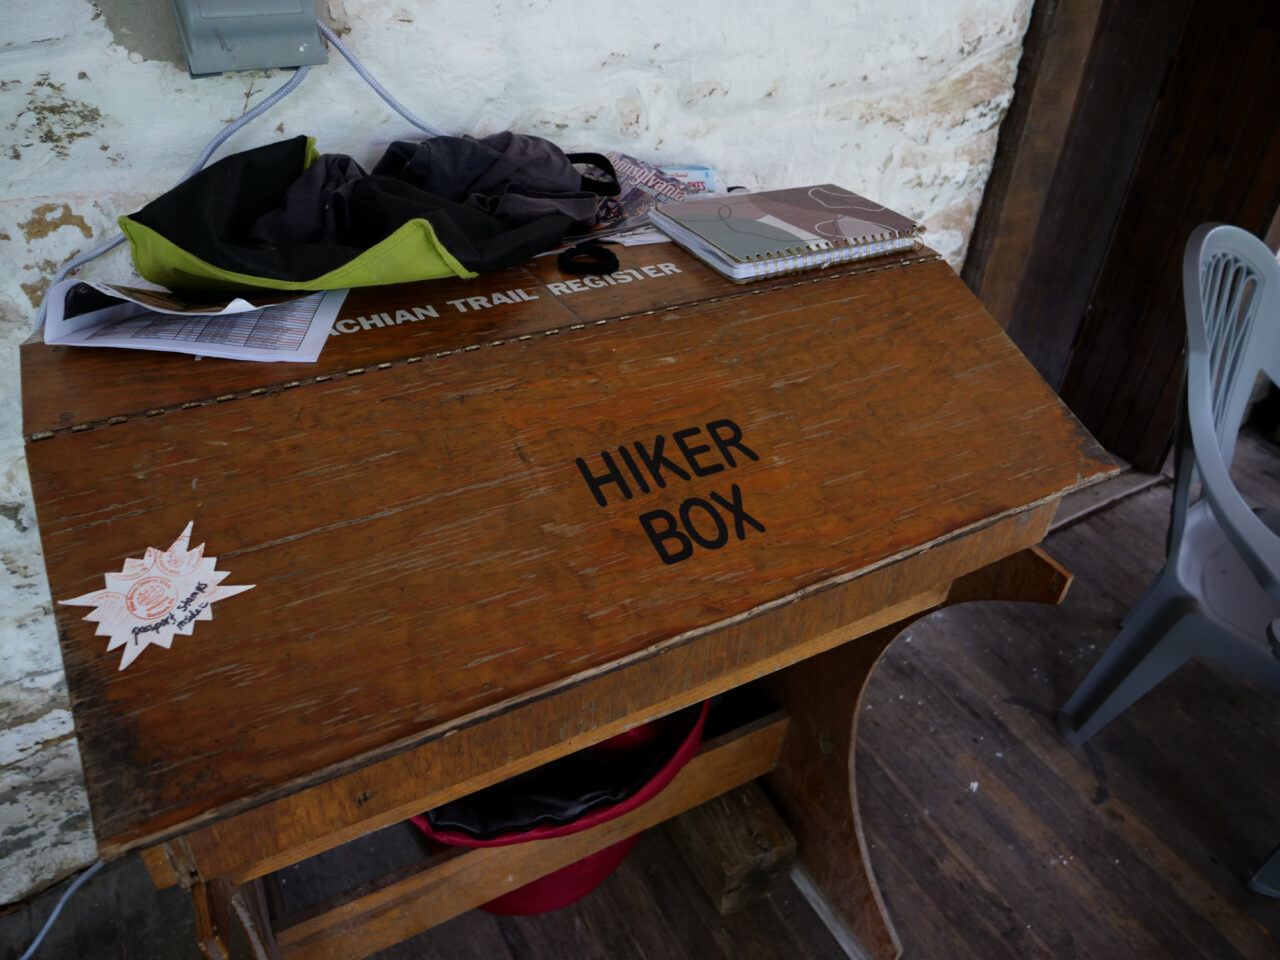 A hiker box with useful items at the Pine Grove Furnace store on Tuesday, July 18, 2023. (